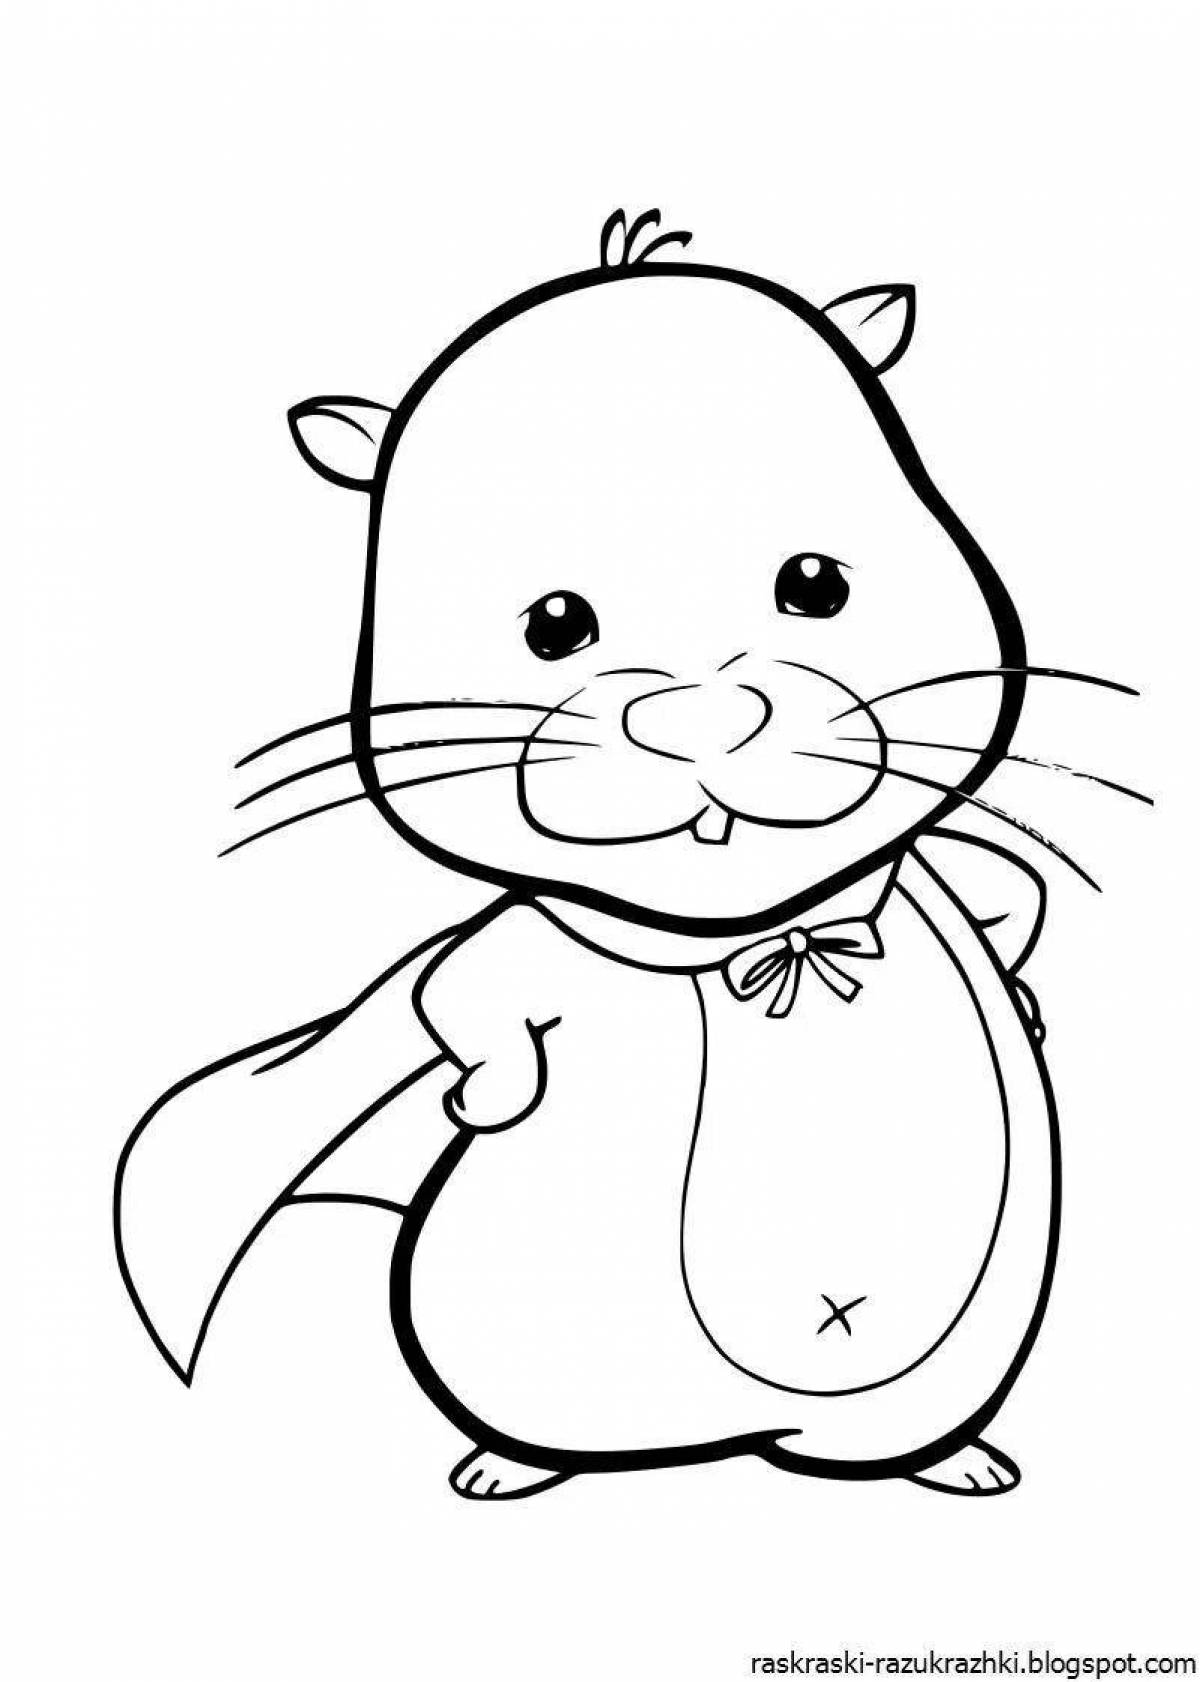 Colorful hamster coloring page